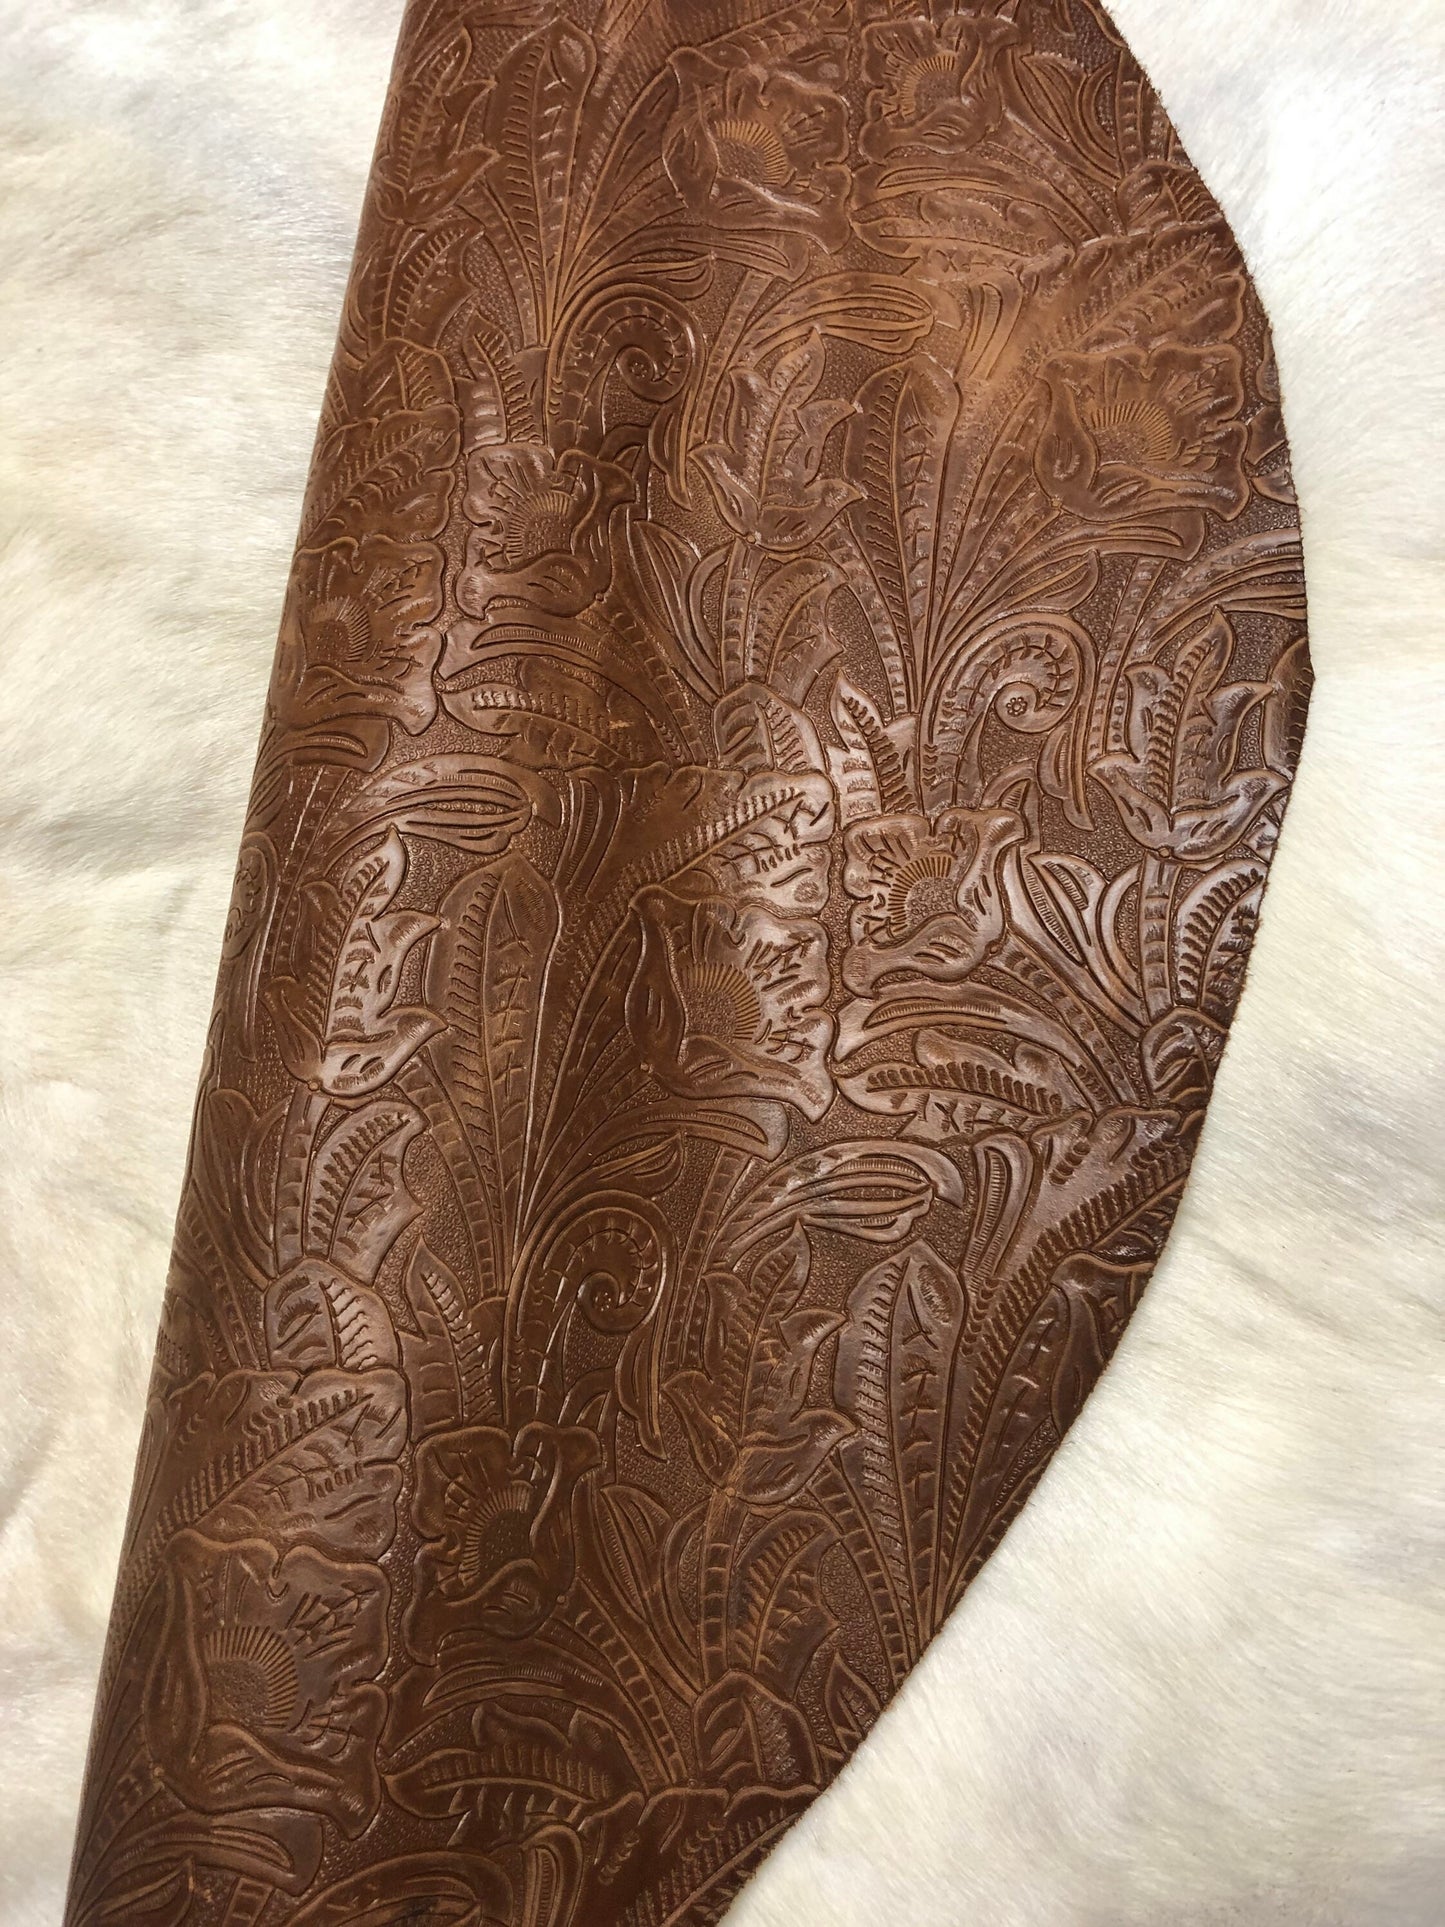 Embossed Brown Chrome tanned Designer leather - Raw Leather - Wholesale Leather 3-5oz